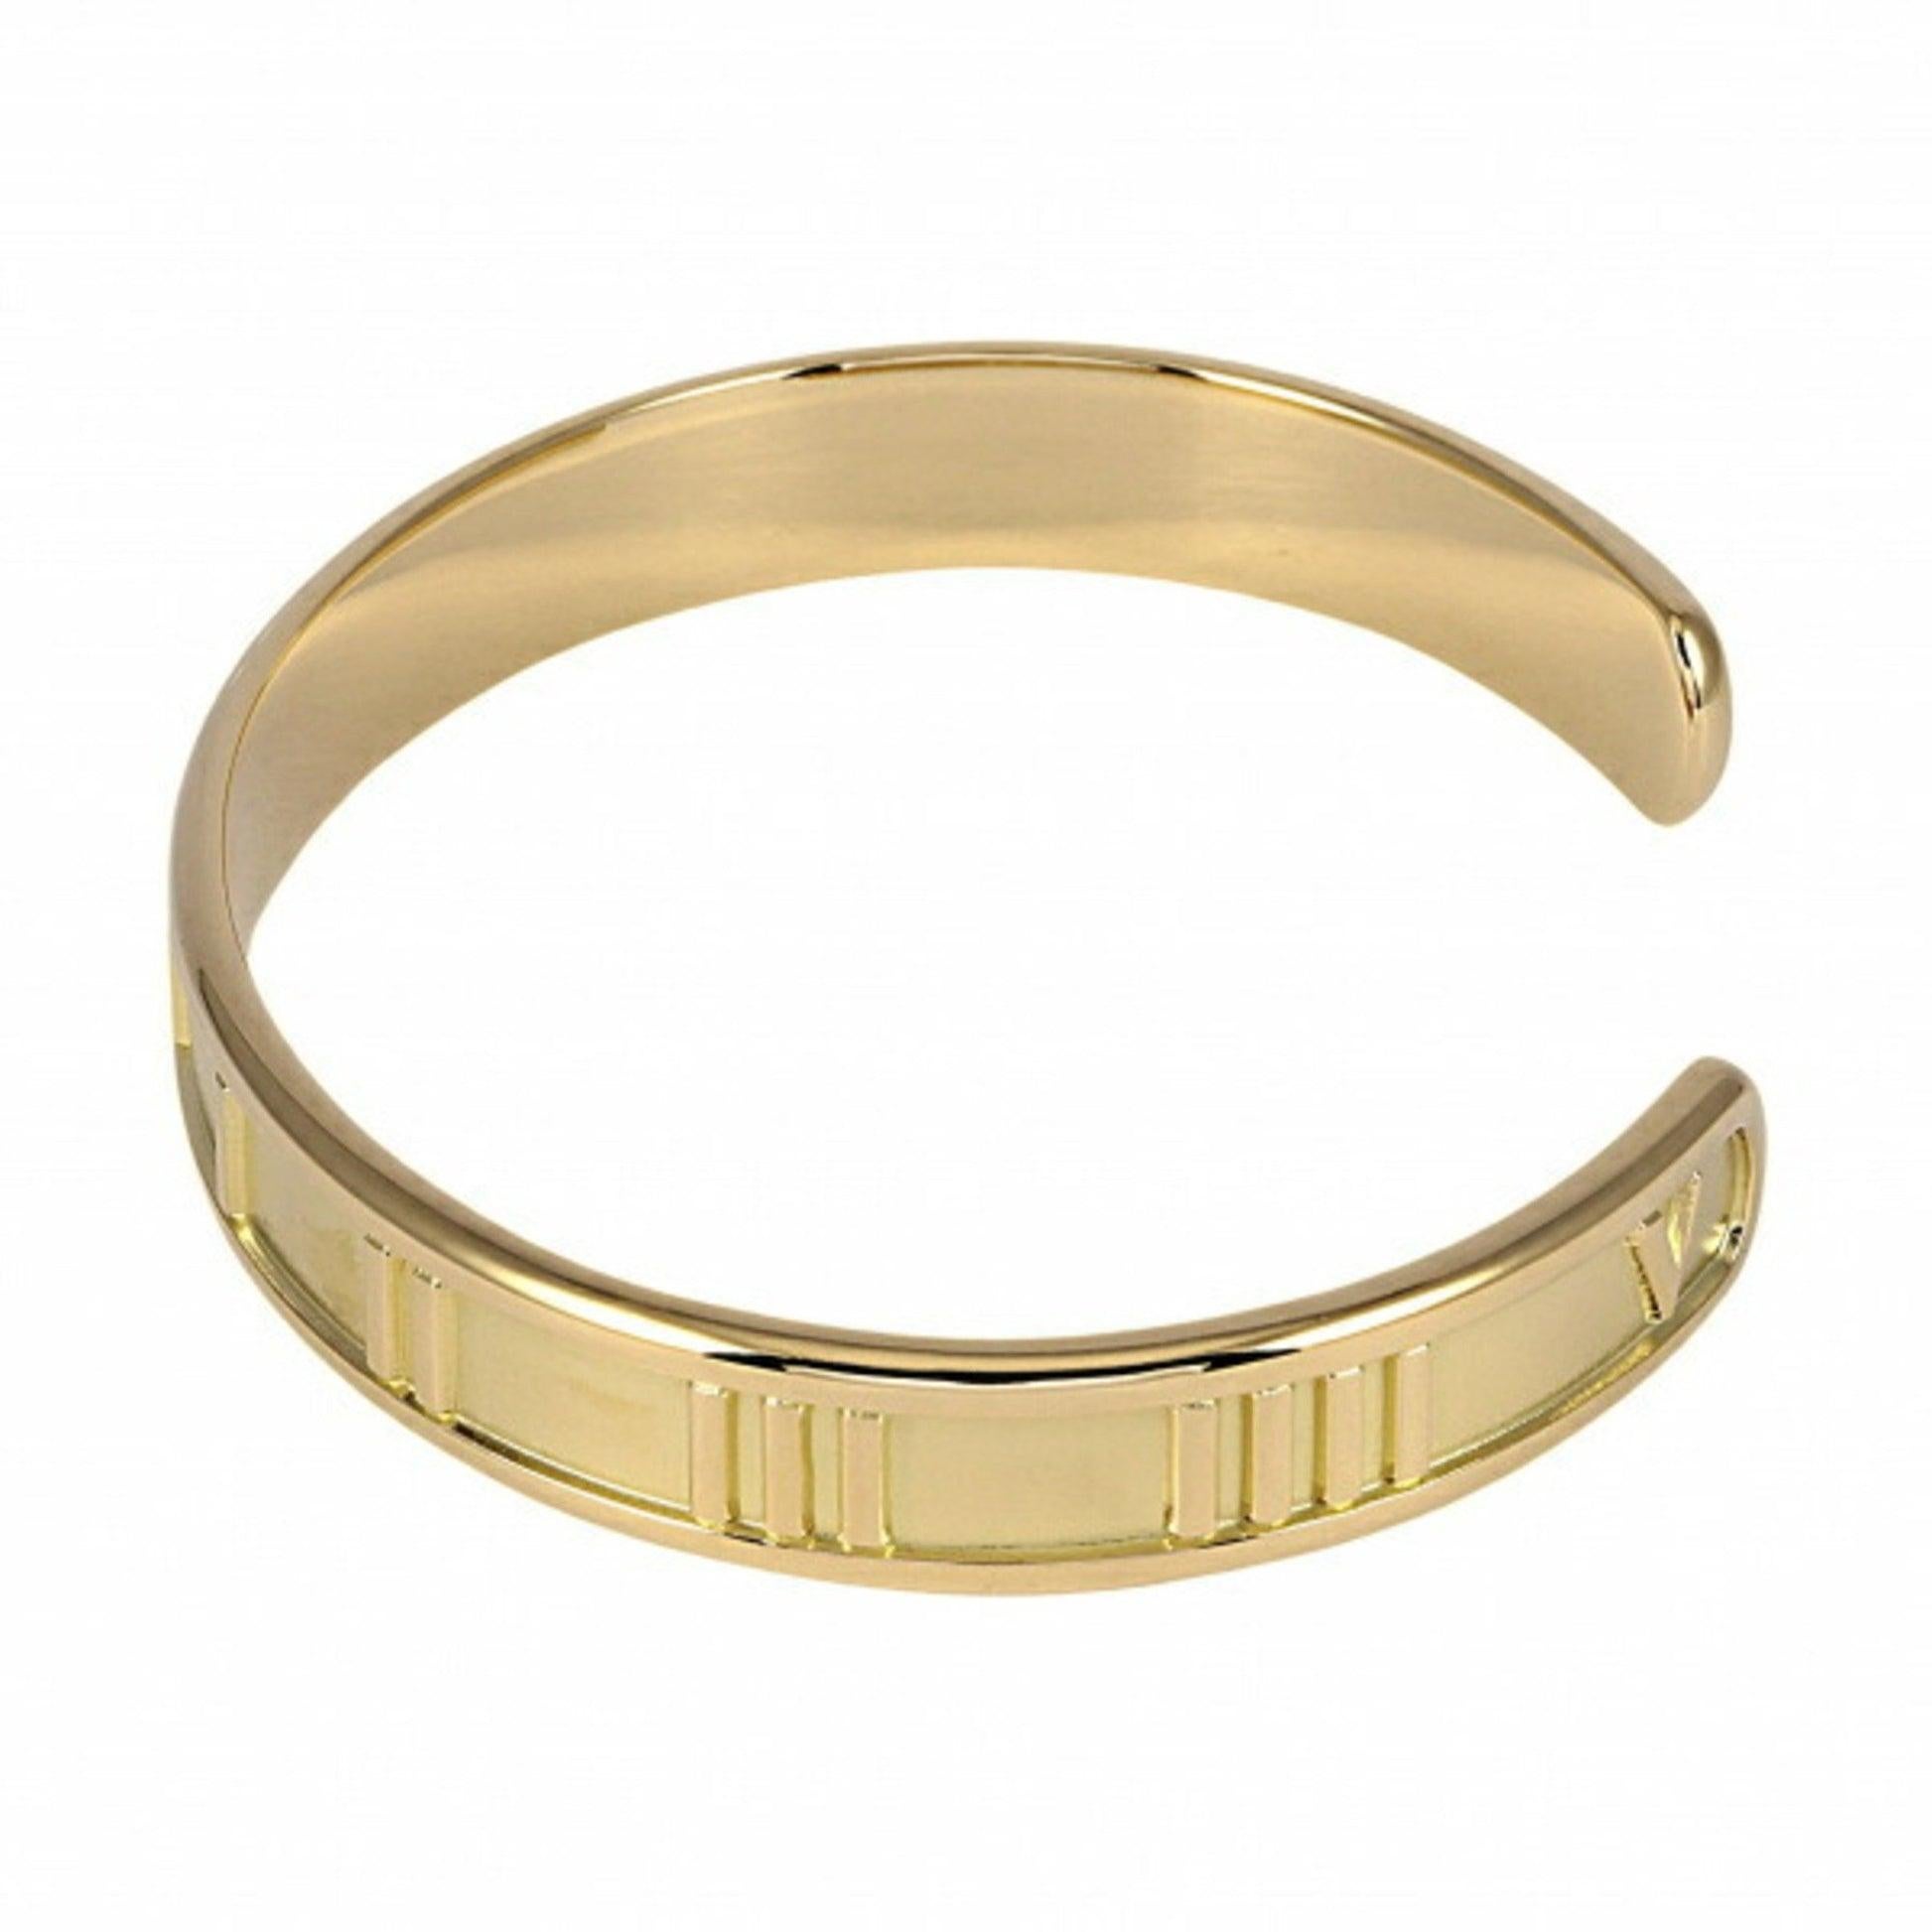 Tiffany Atlas Bracelet in 18K Yellow Gold In Excellent Condition For Sale In London, GB